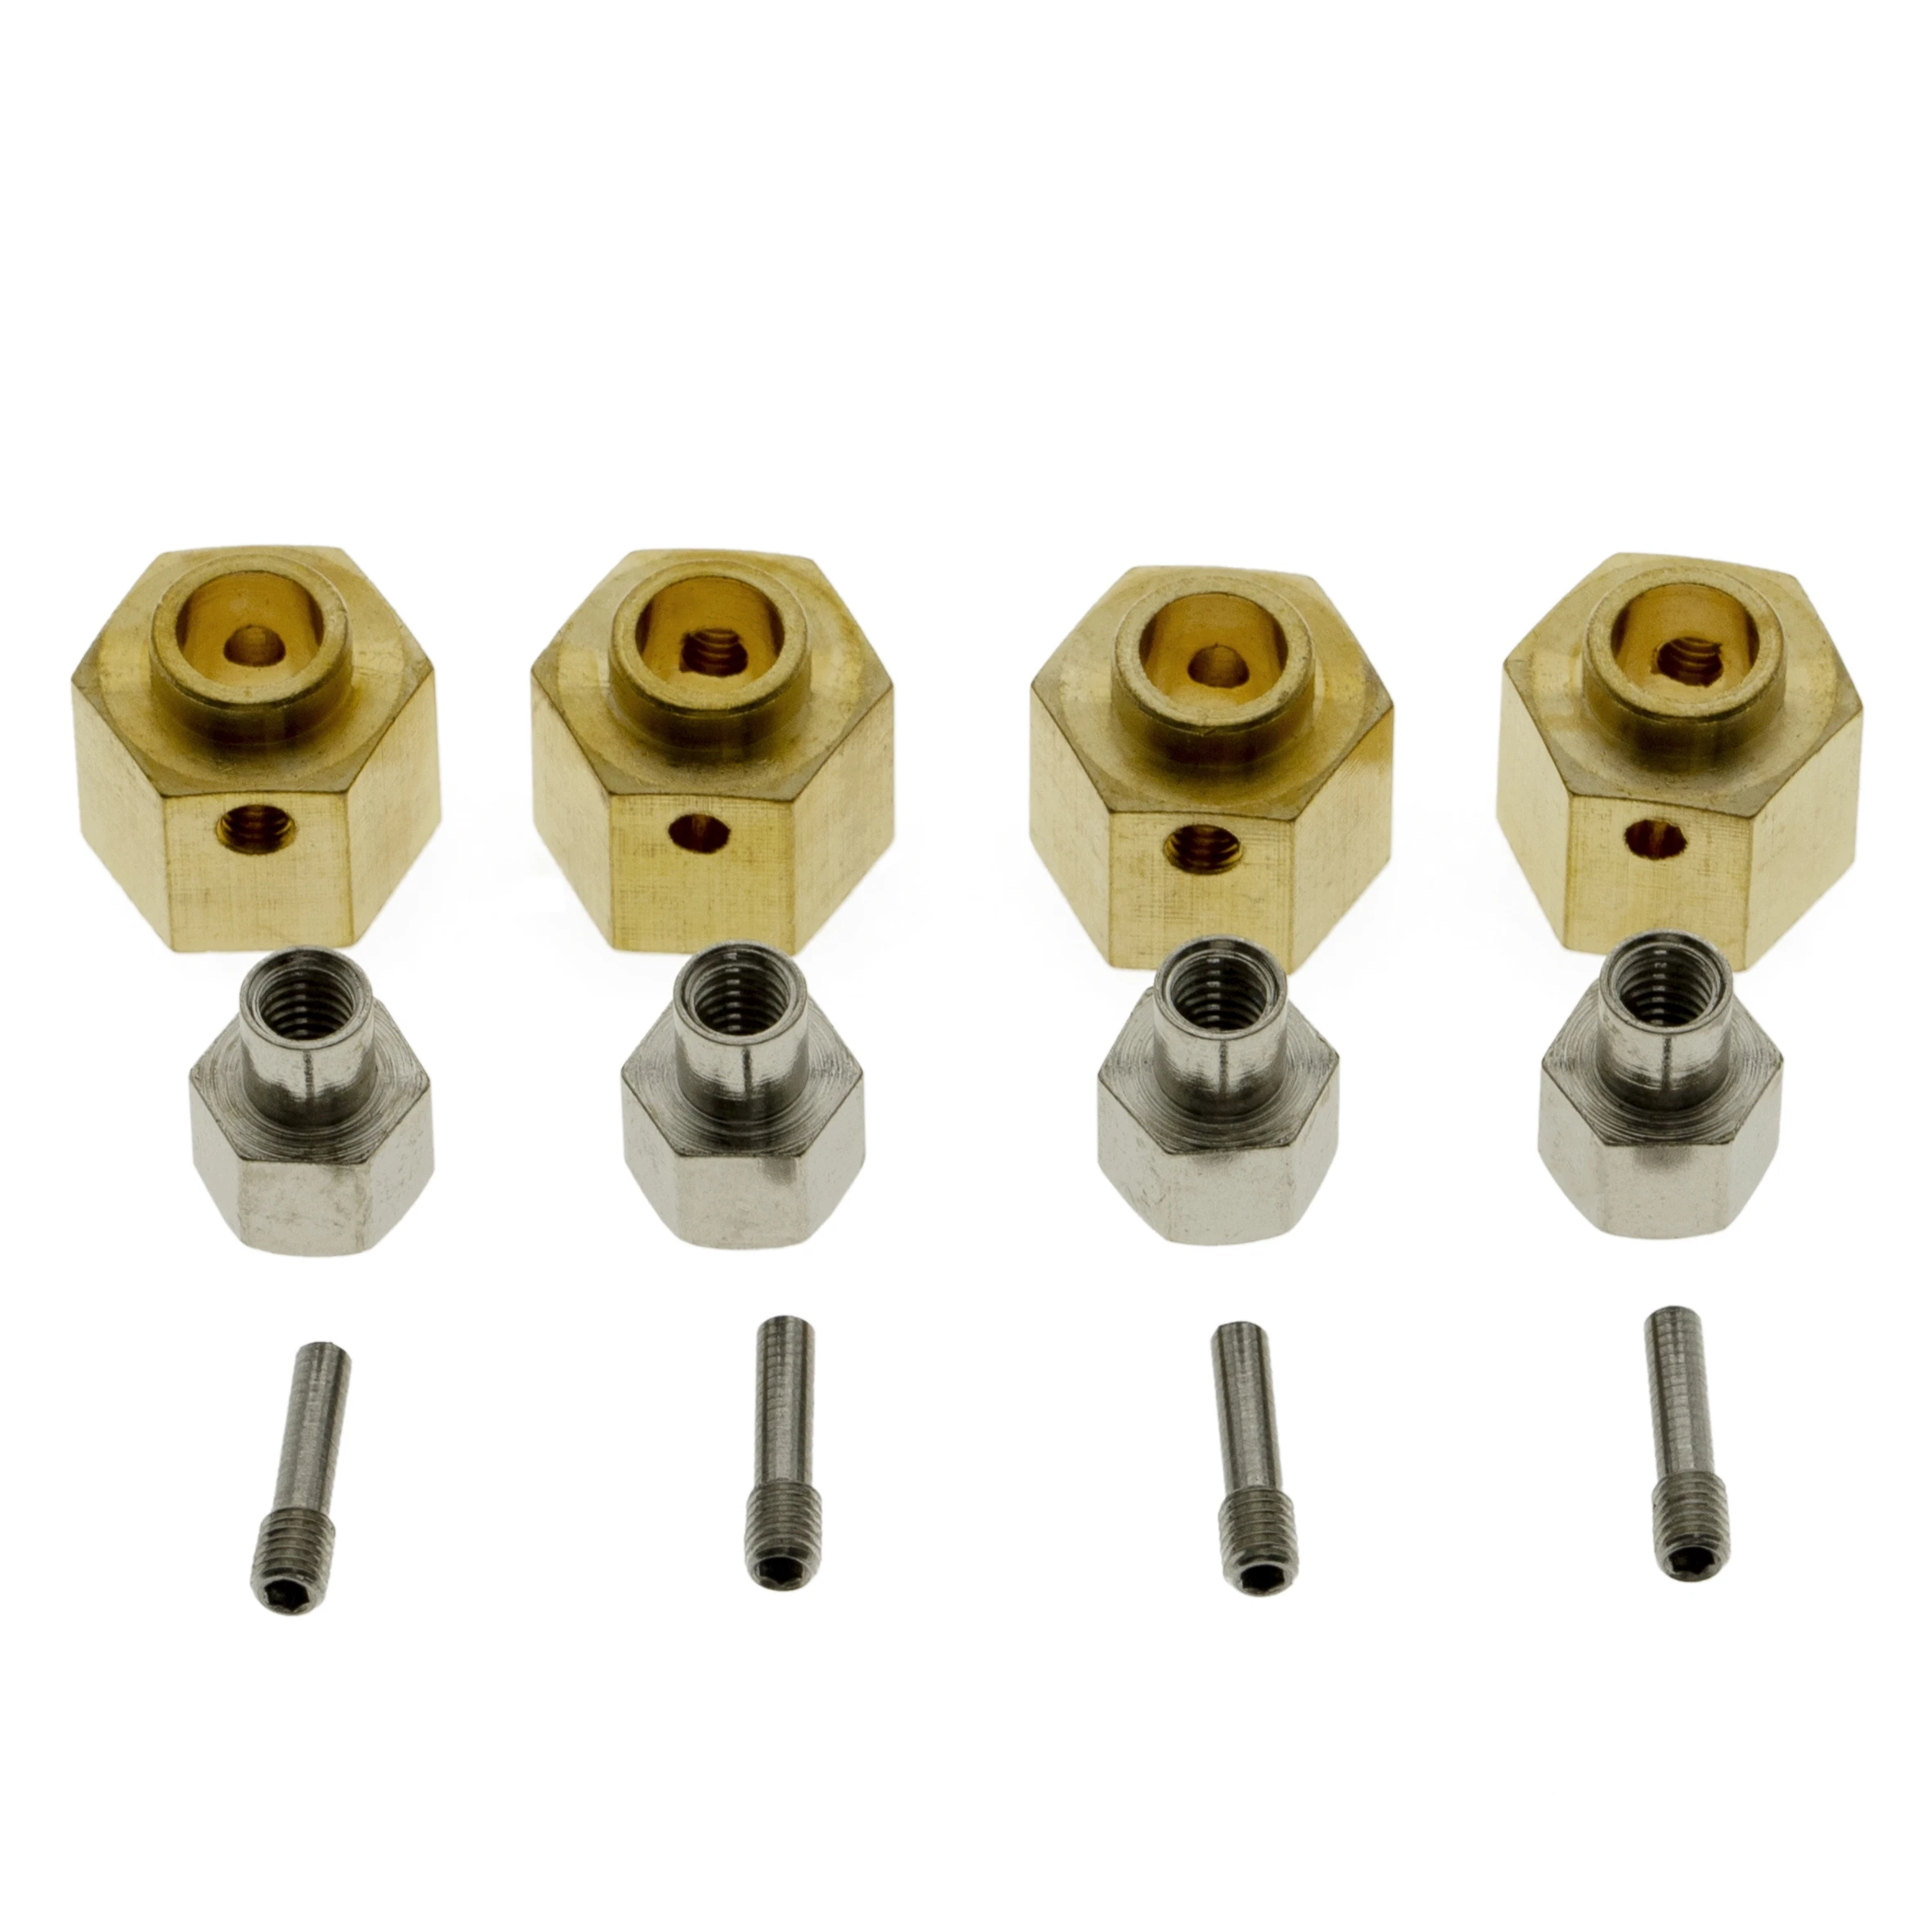 

4PCS 12MM Extended Wheel Hex Heavier Brass Adapter for Axial SCX10 III AXI03007 Capra 1.9 UTB AXI03004 RC Crawler Upgrades Parts